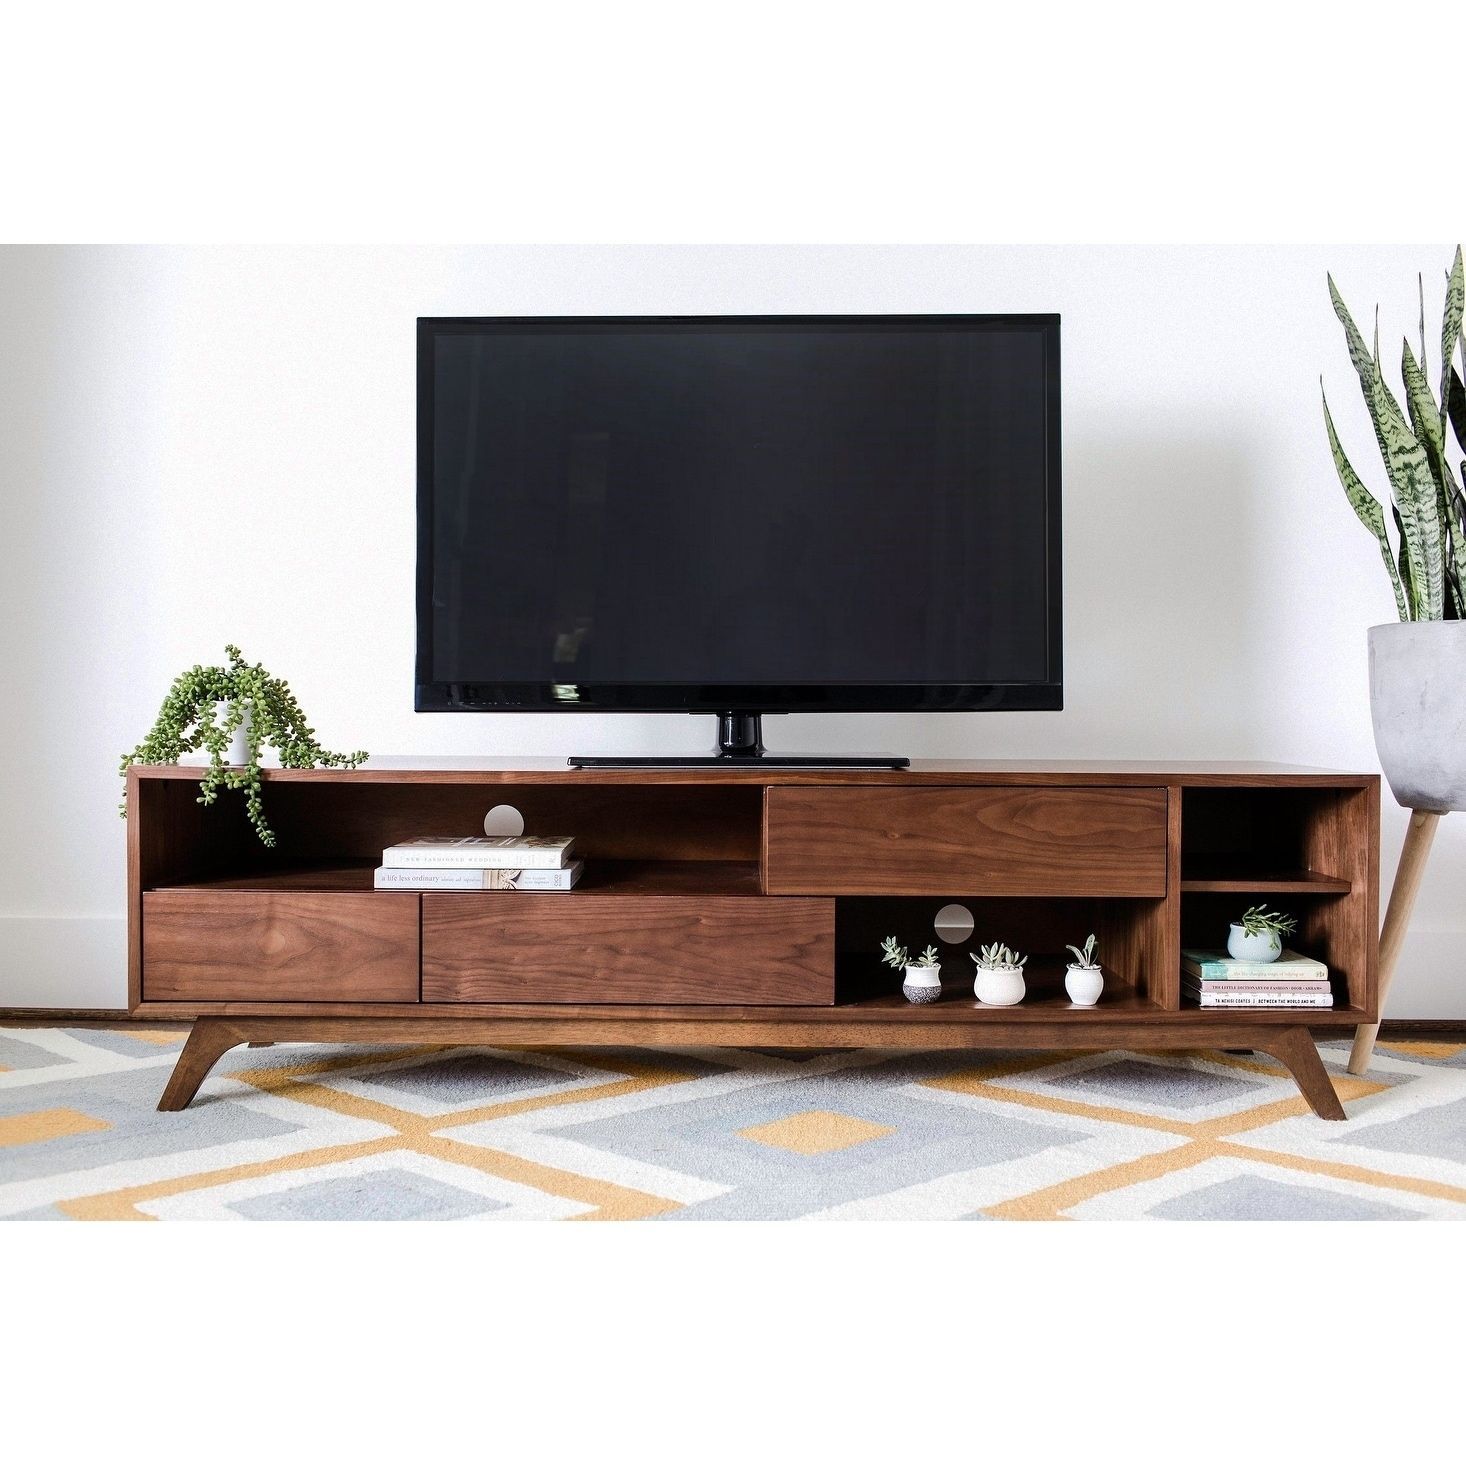 Beverly Mid Century Modern Tv Stand, Cabinet With Storage, Walnut, Bro With Regard To Mid Century Entertainment Centers (View 20 of 20)